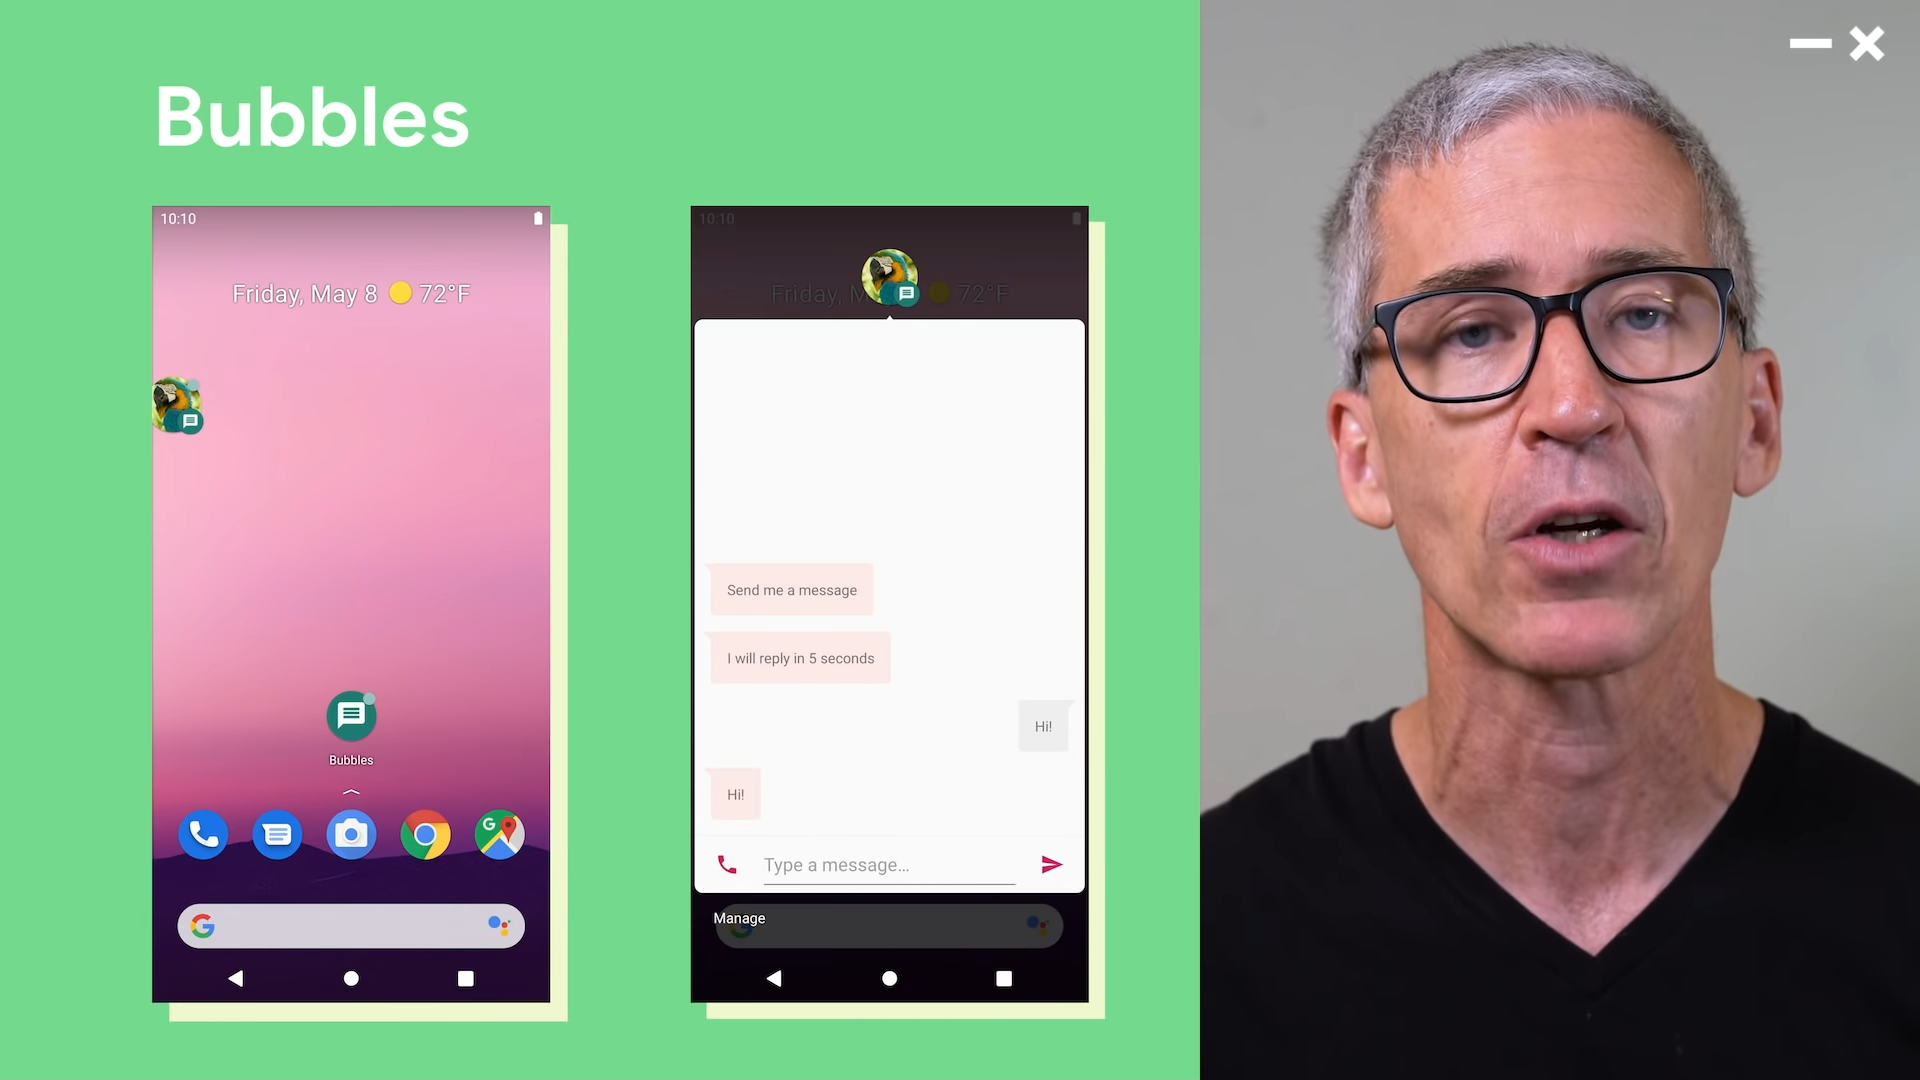 Android 11 Bubbles notification system - Google explains the new Android 11 notification system and Bubbles feature